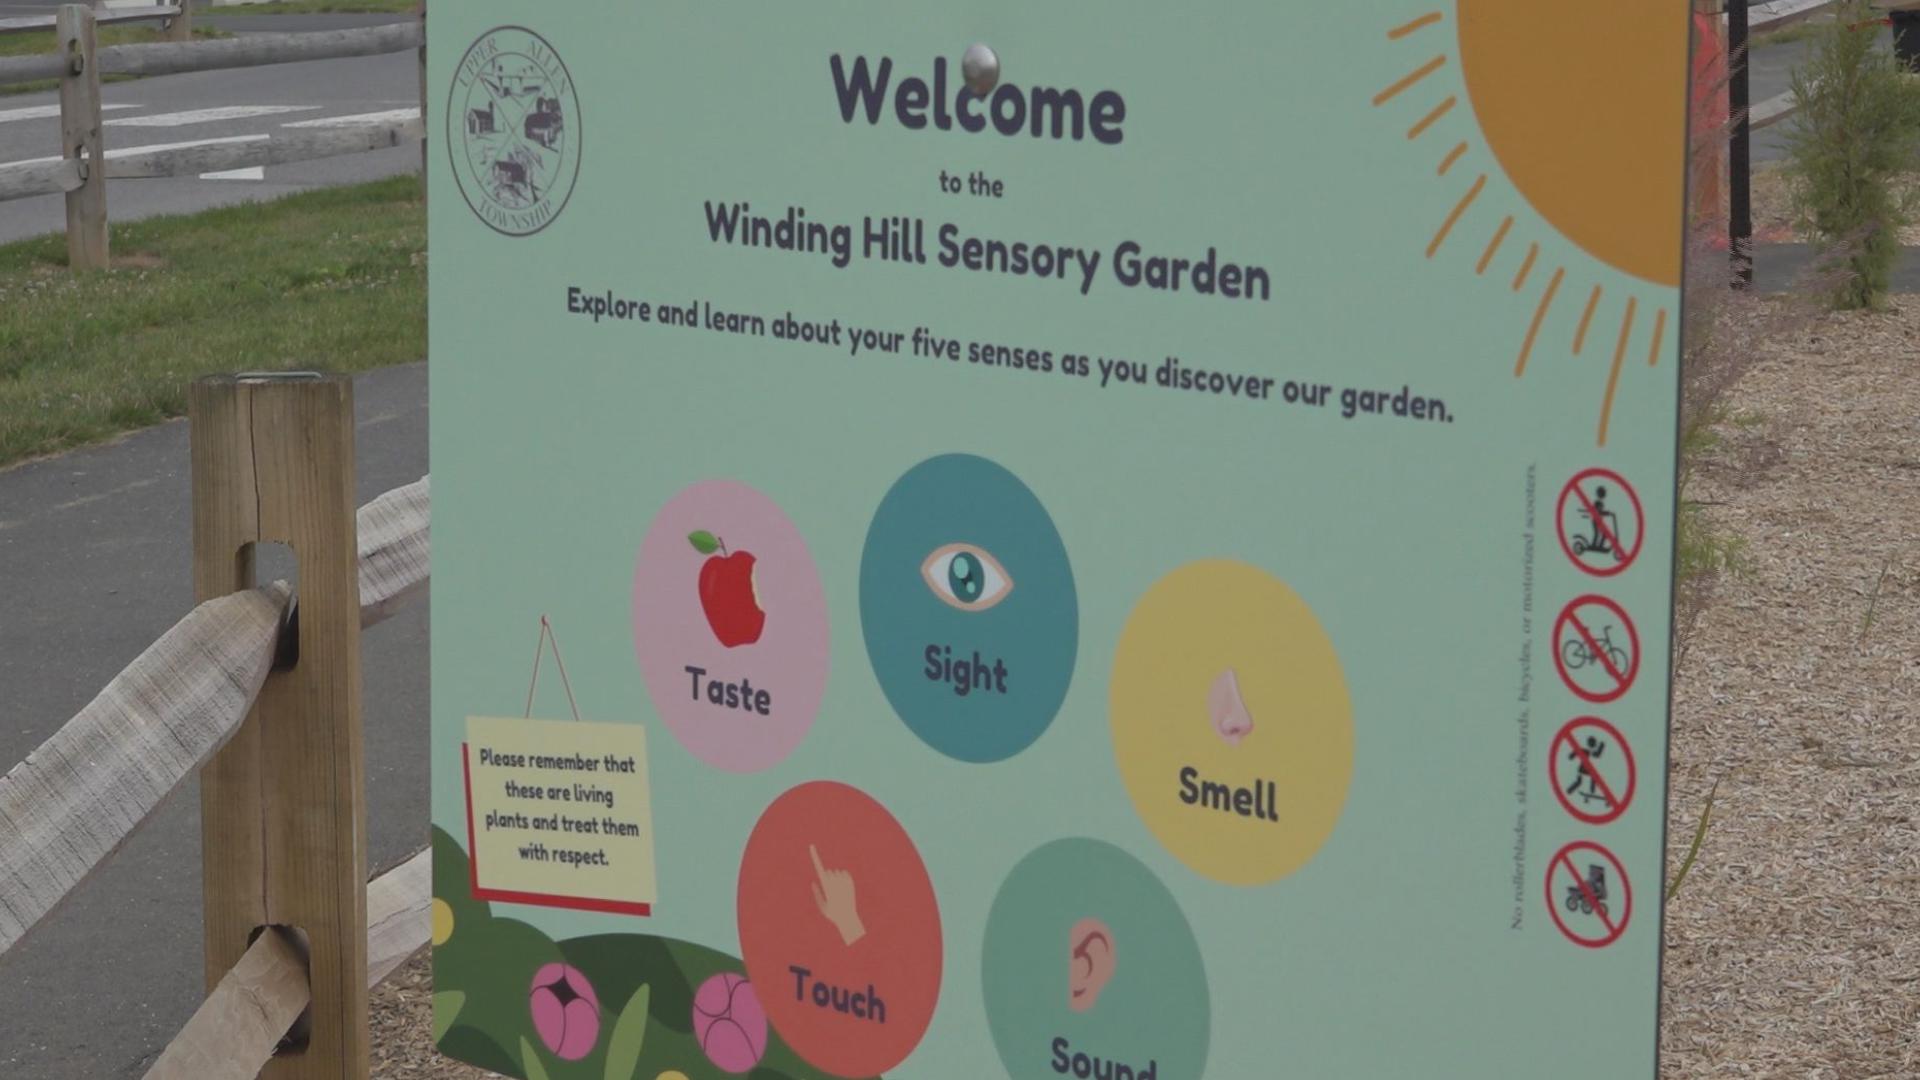 A new sensory garden opened Wednesday at Winding Hill Park North. It's a part of the Upper Allen Township Parks Department's mission to be inclusive and accessible.